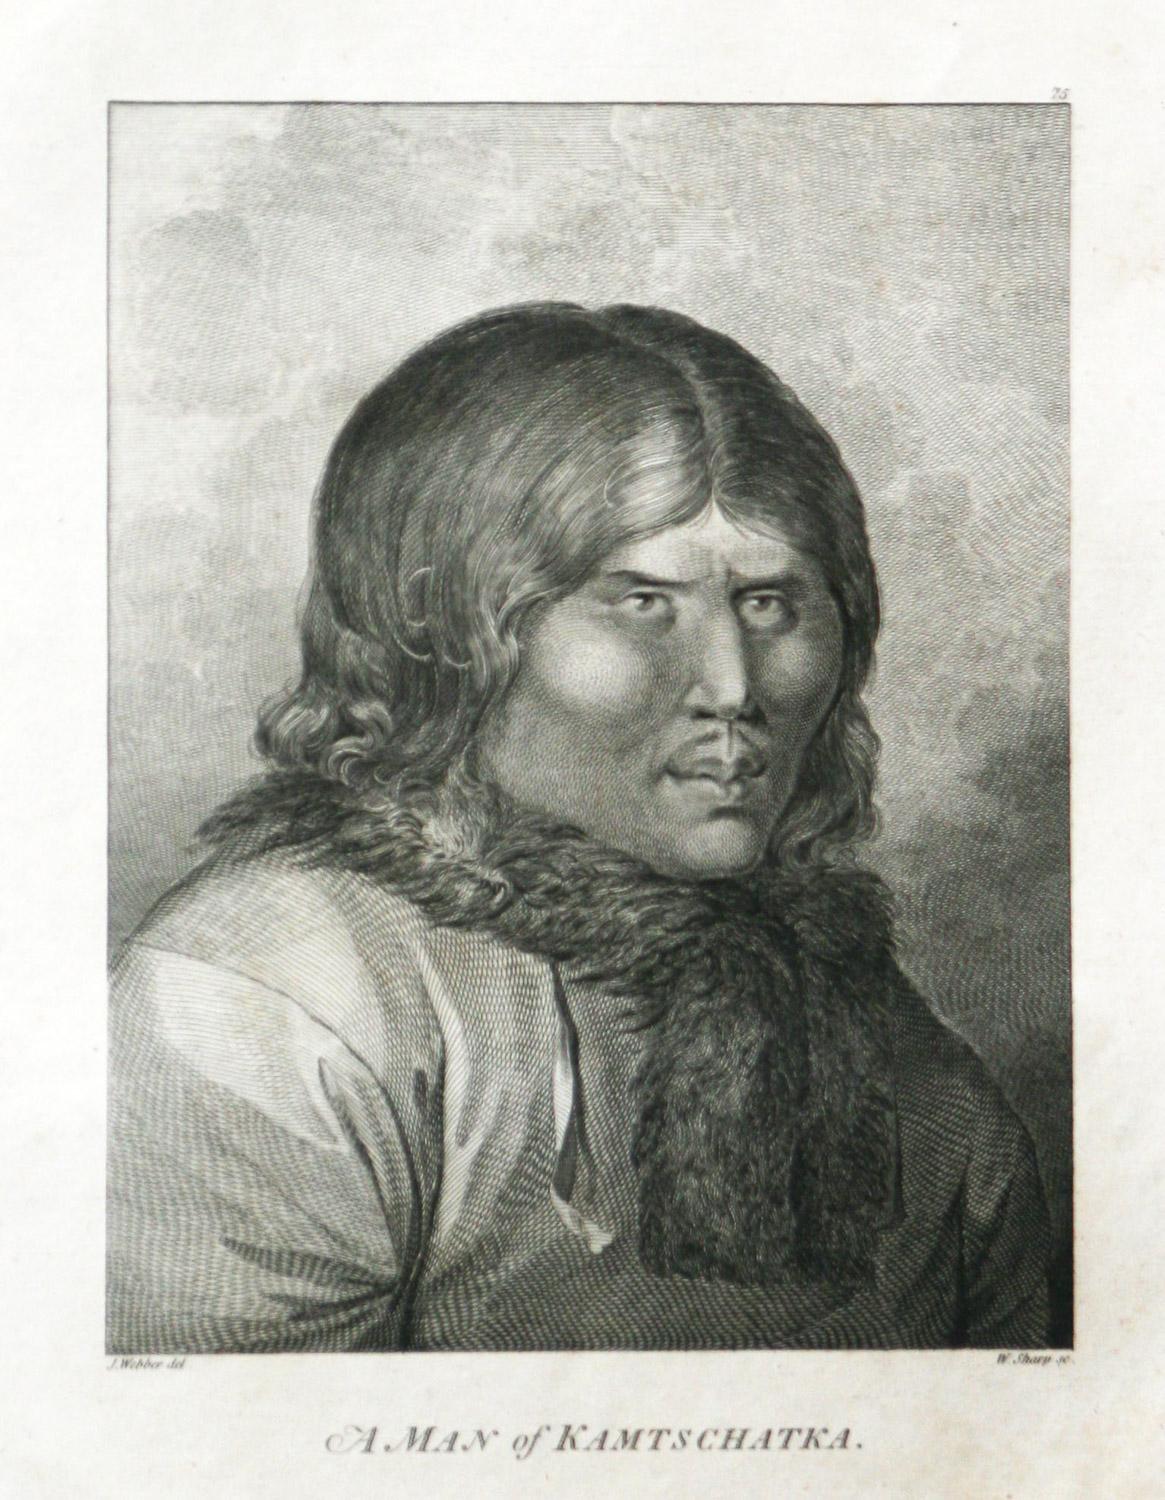 A Man of Kamtschatka (Russia) is from the 1784 First Edition Atlas Accompanying Capt. James Cook and King; Third and Final Voyage of Captain James Cook. John Webber (1752-1793) was the official artist for the third voyage of Captain James Cook